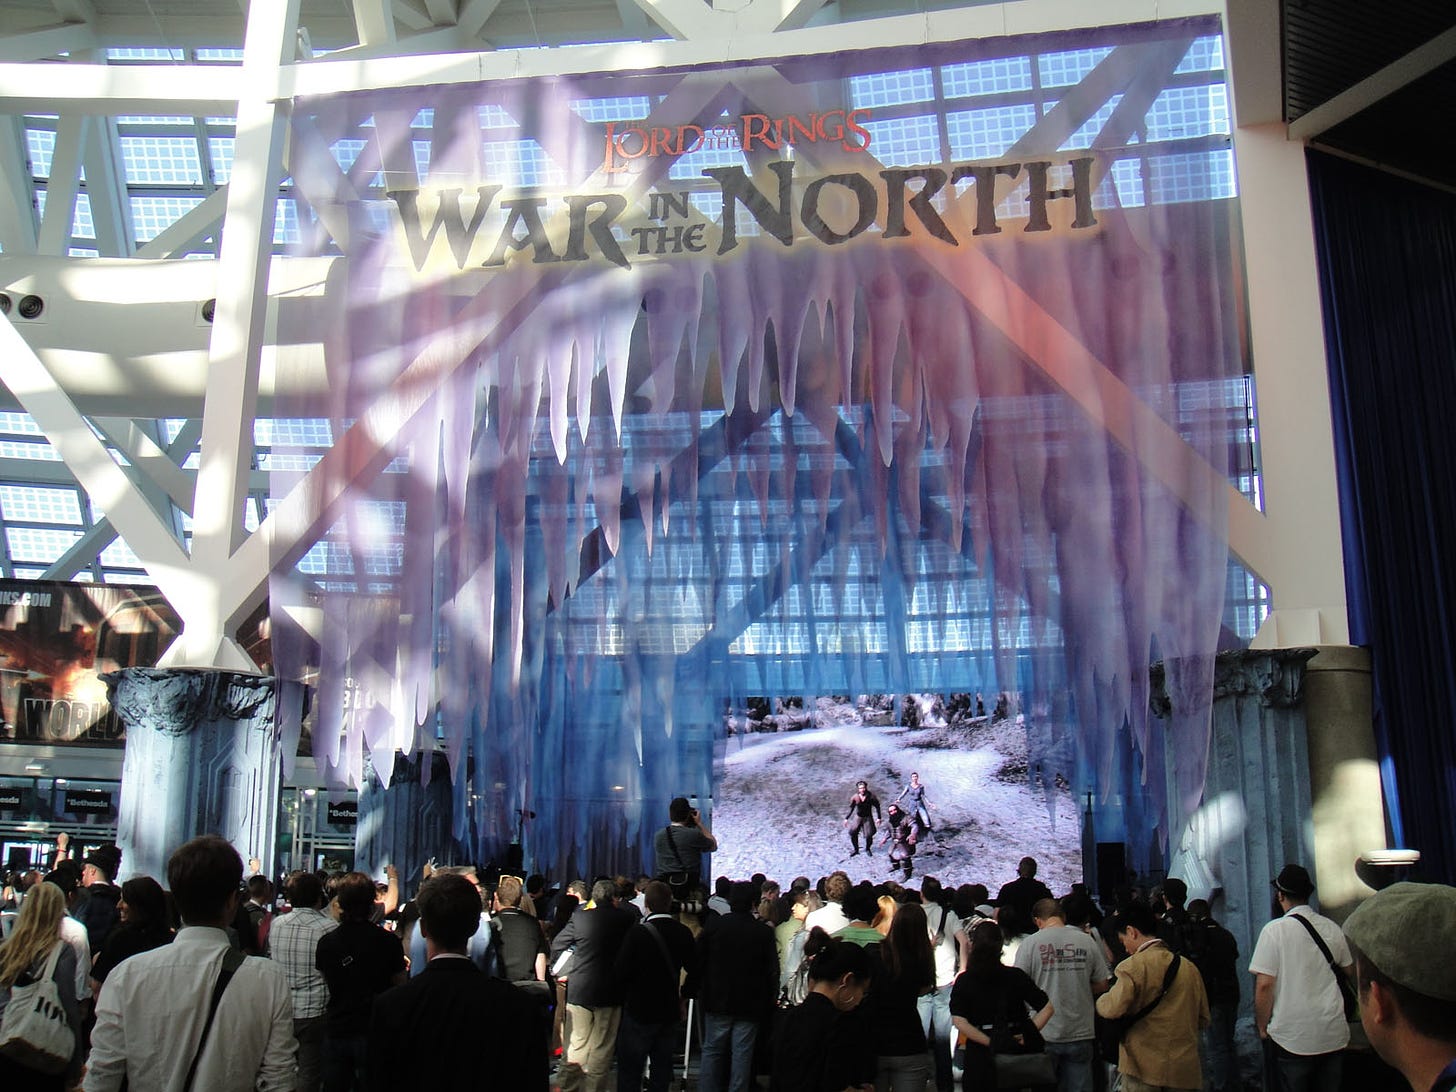 A large crowd at a conference gathers in front of a display for the video game The Lord of the Rings: War in the North